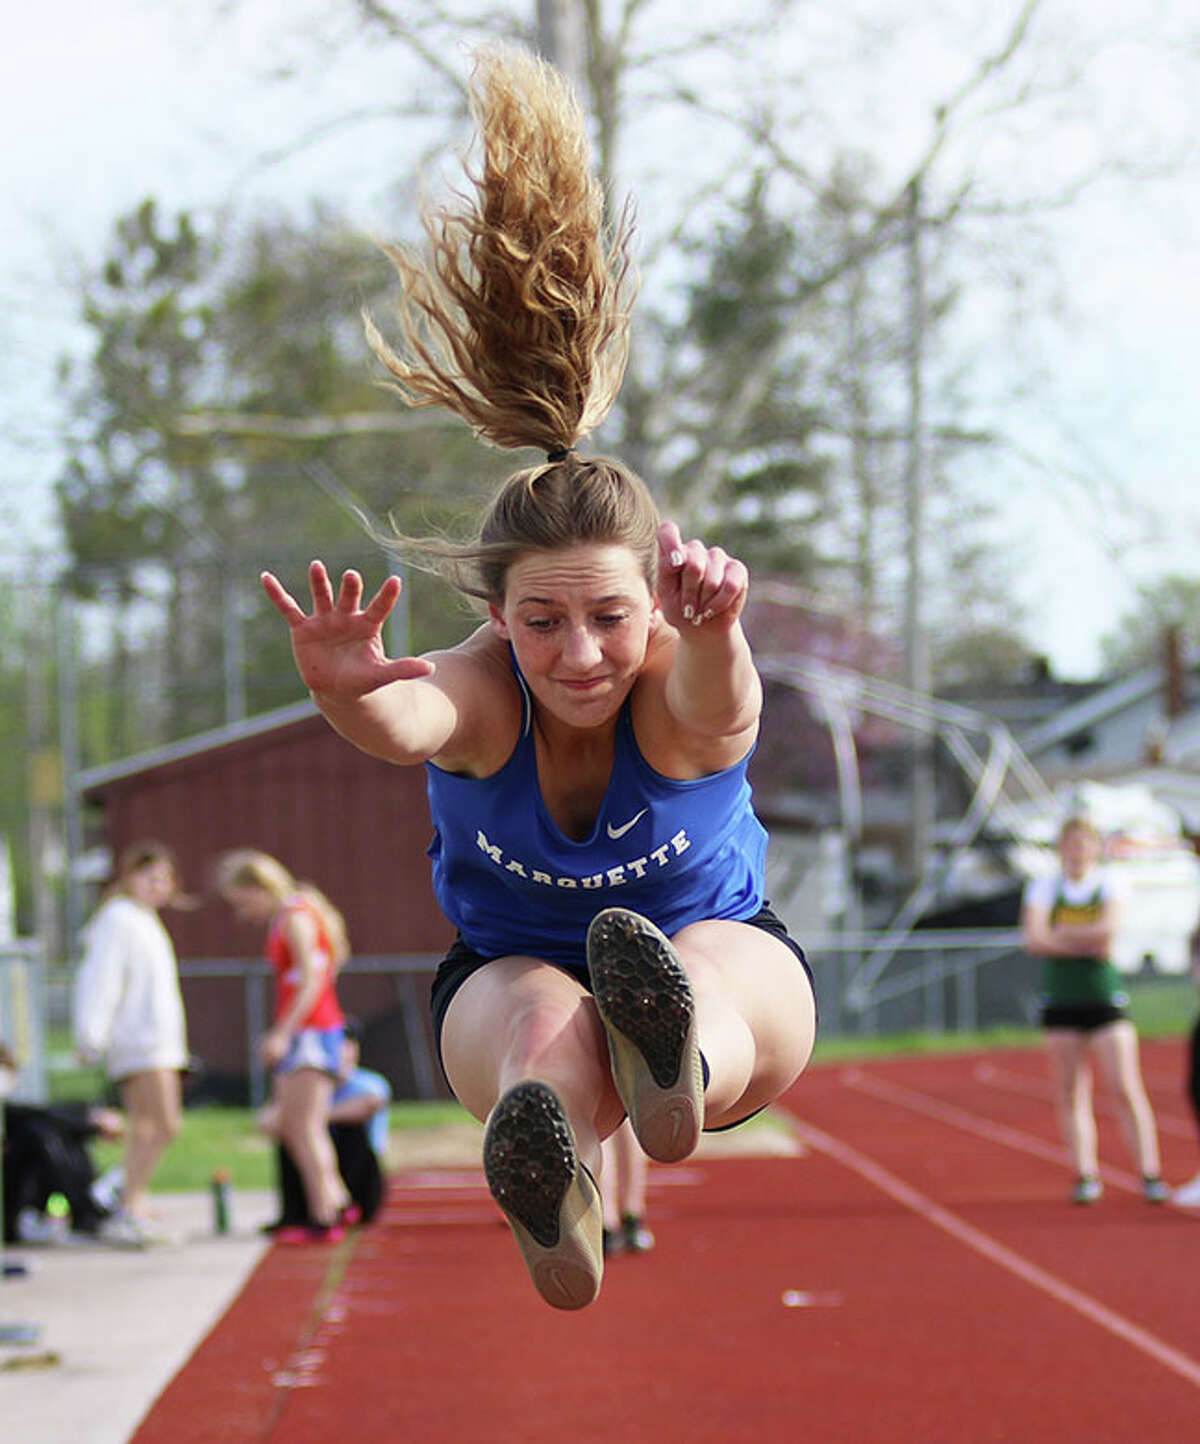 Marquette Catholic junior Sammy Hentrich competes in the long jump at last month's Madison County Meet in Wood River. On Wednesday, Hentrich won three events at the first Gateway Metro Conference Meet at Public School Stadium in Alton.